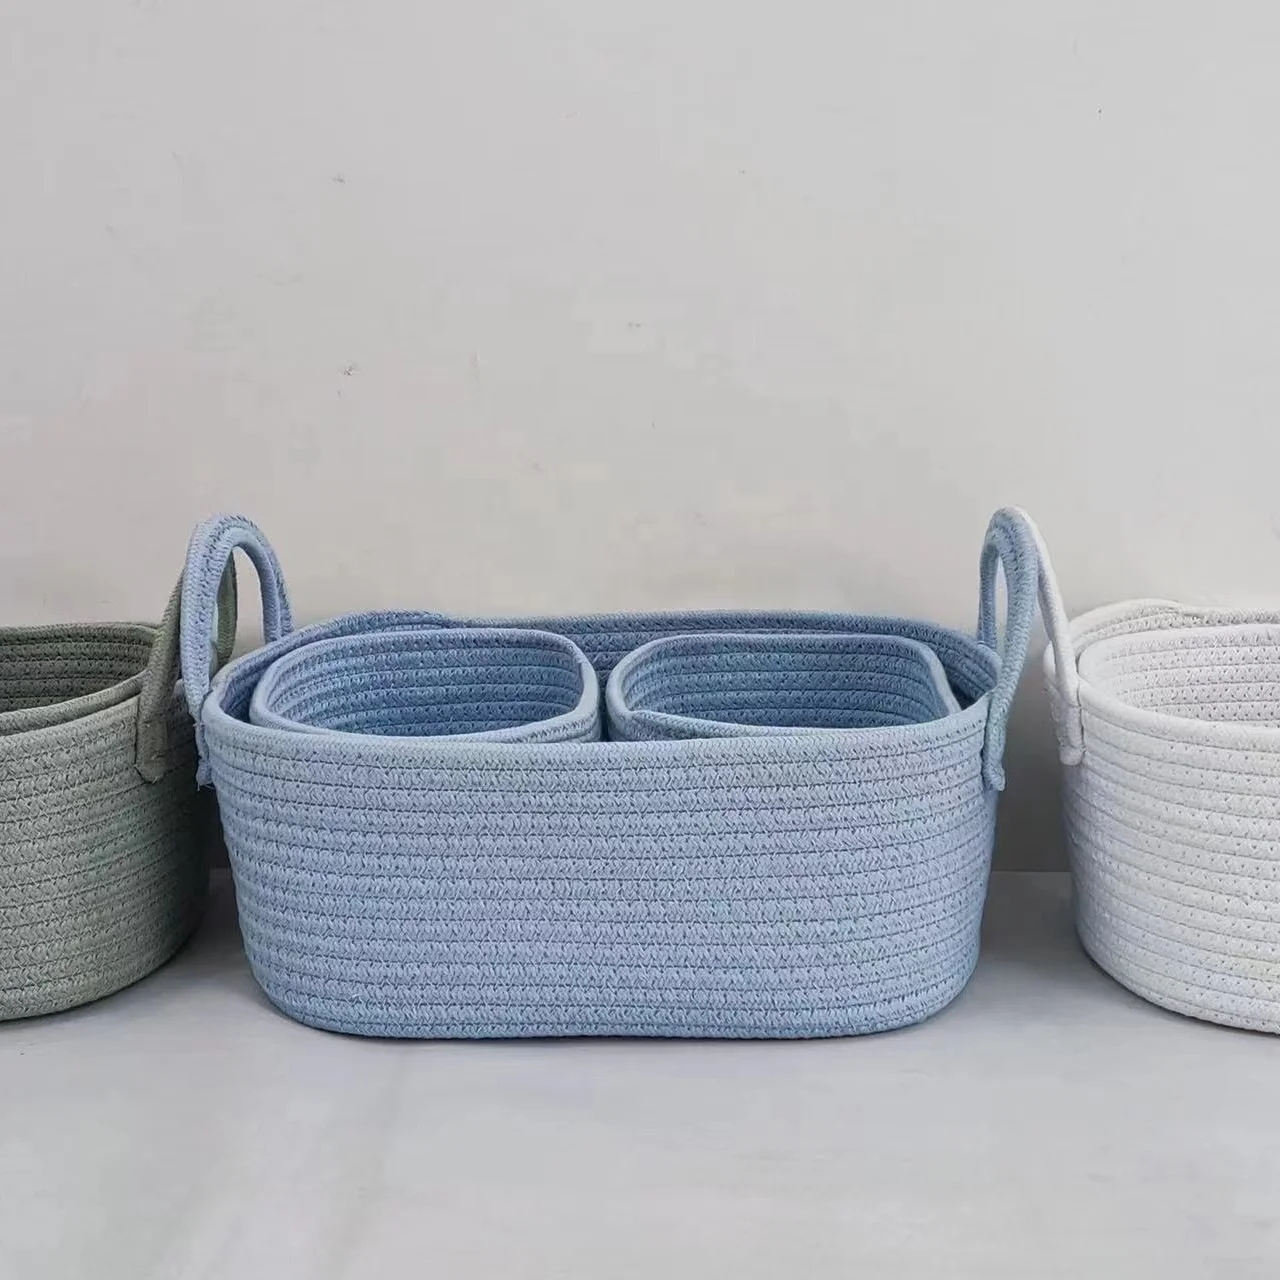 Wholesale Cute Woven Cotton Rope Basket Kids With Tassel For The Baby Laundry Basket Cotton Storage Basket